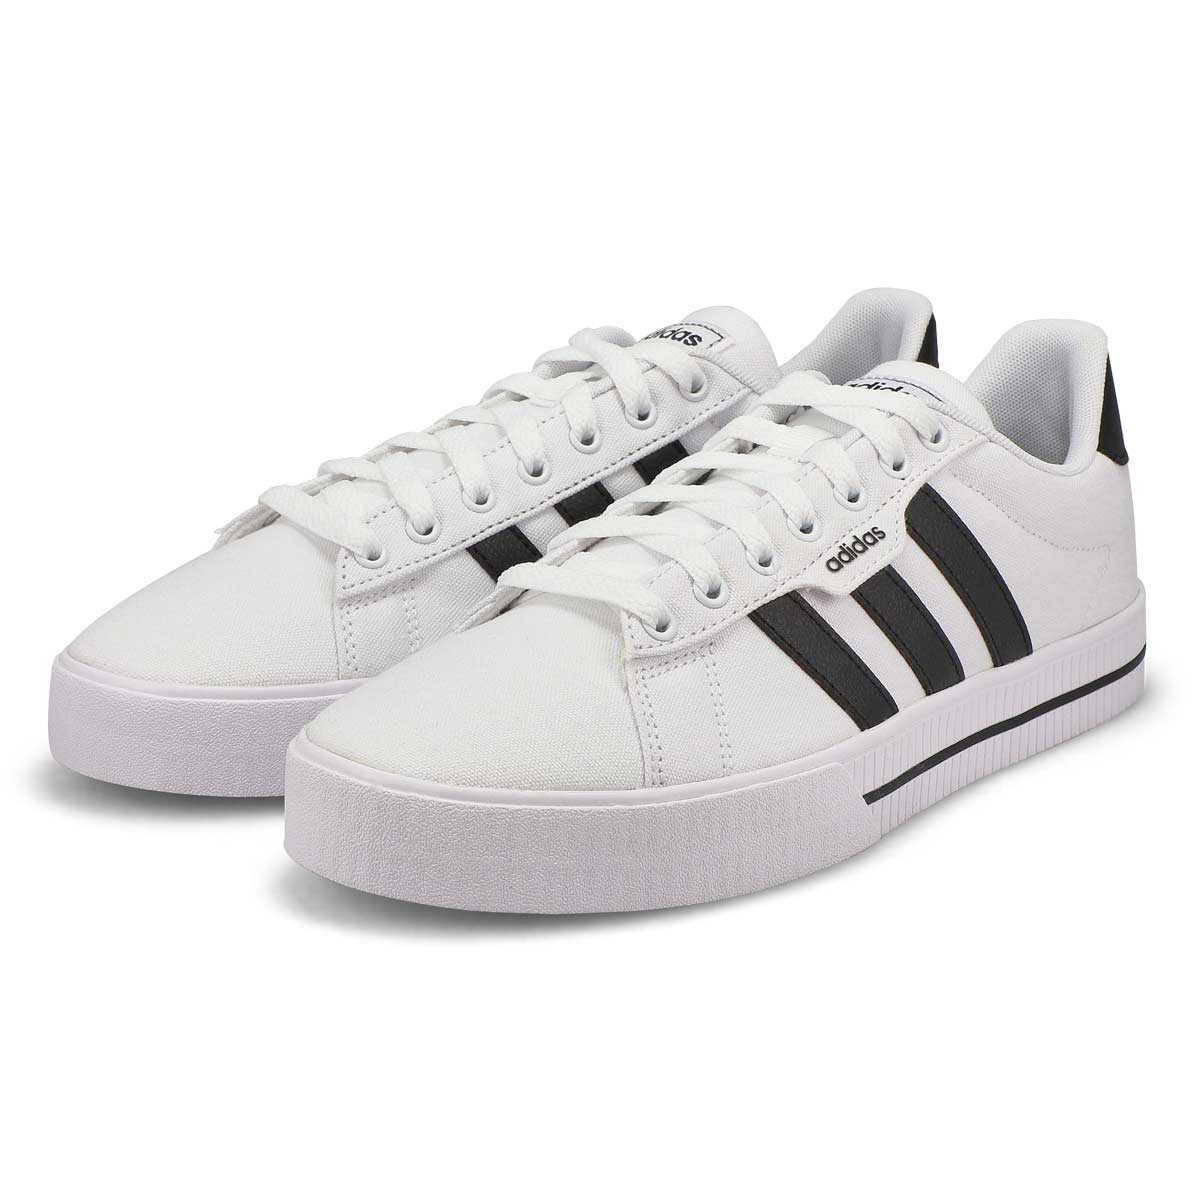 Men's Daily 3.0 Lace Up Sneaker - White/Black